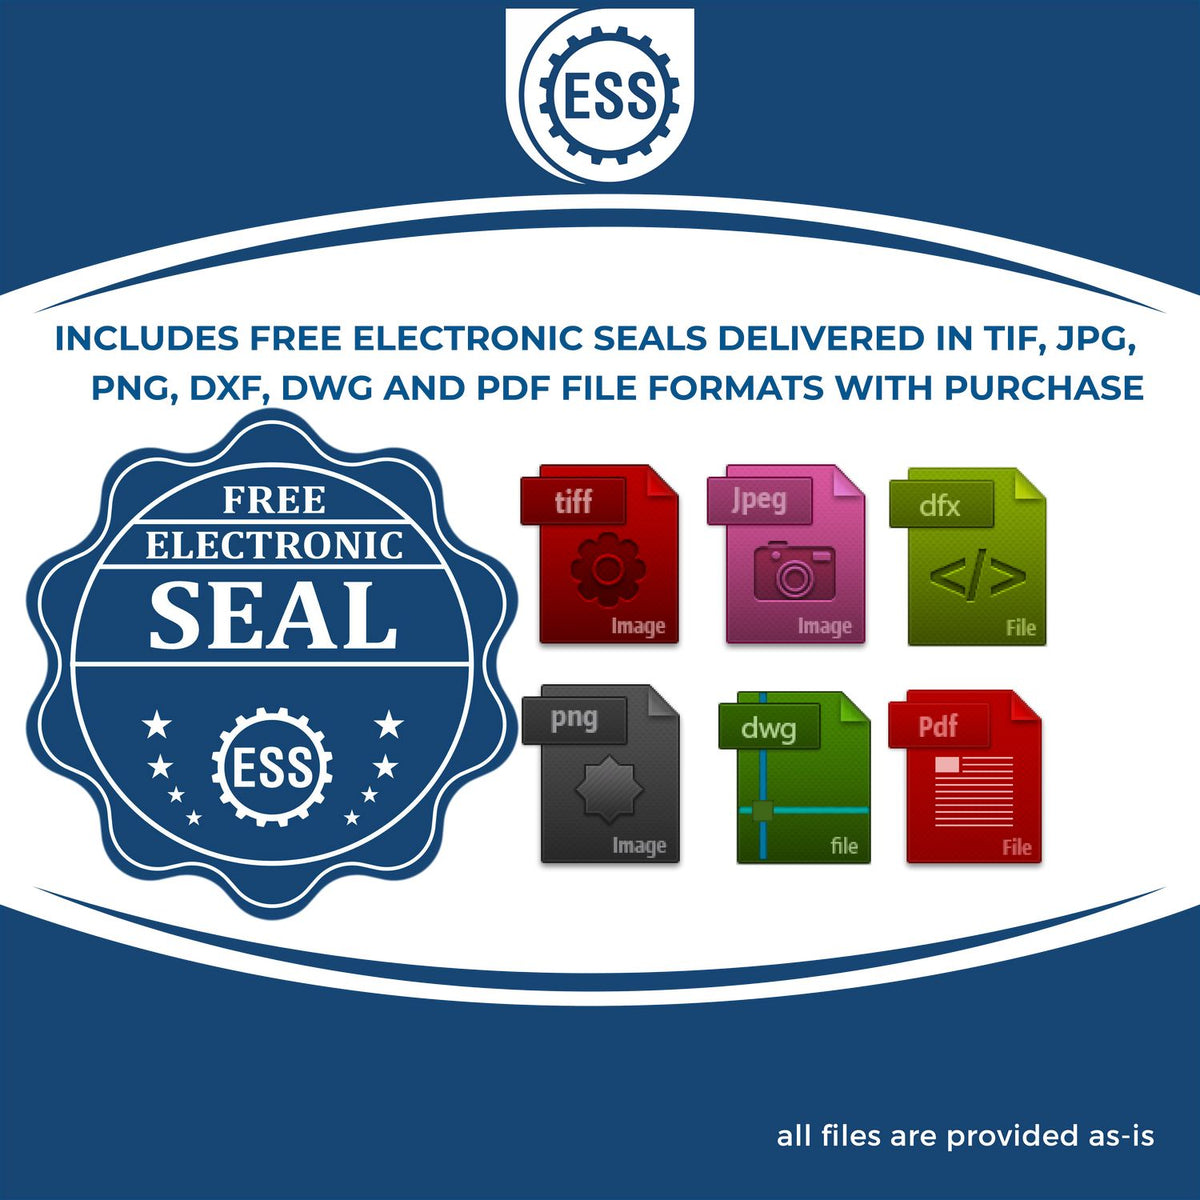 An infographic for the free electronic seal for the Gift Idaho Architect Seal illustrating the different file type icons such as DXF, DWG, TIF, JPG and PNG.